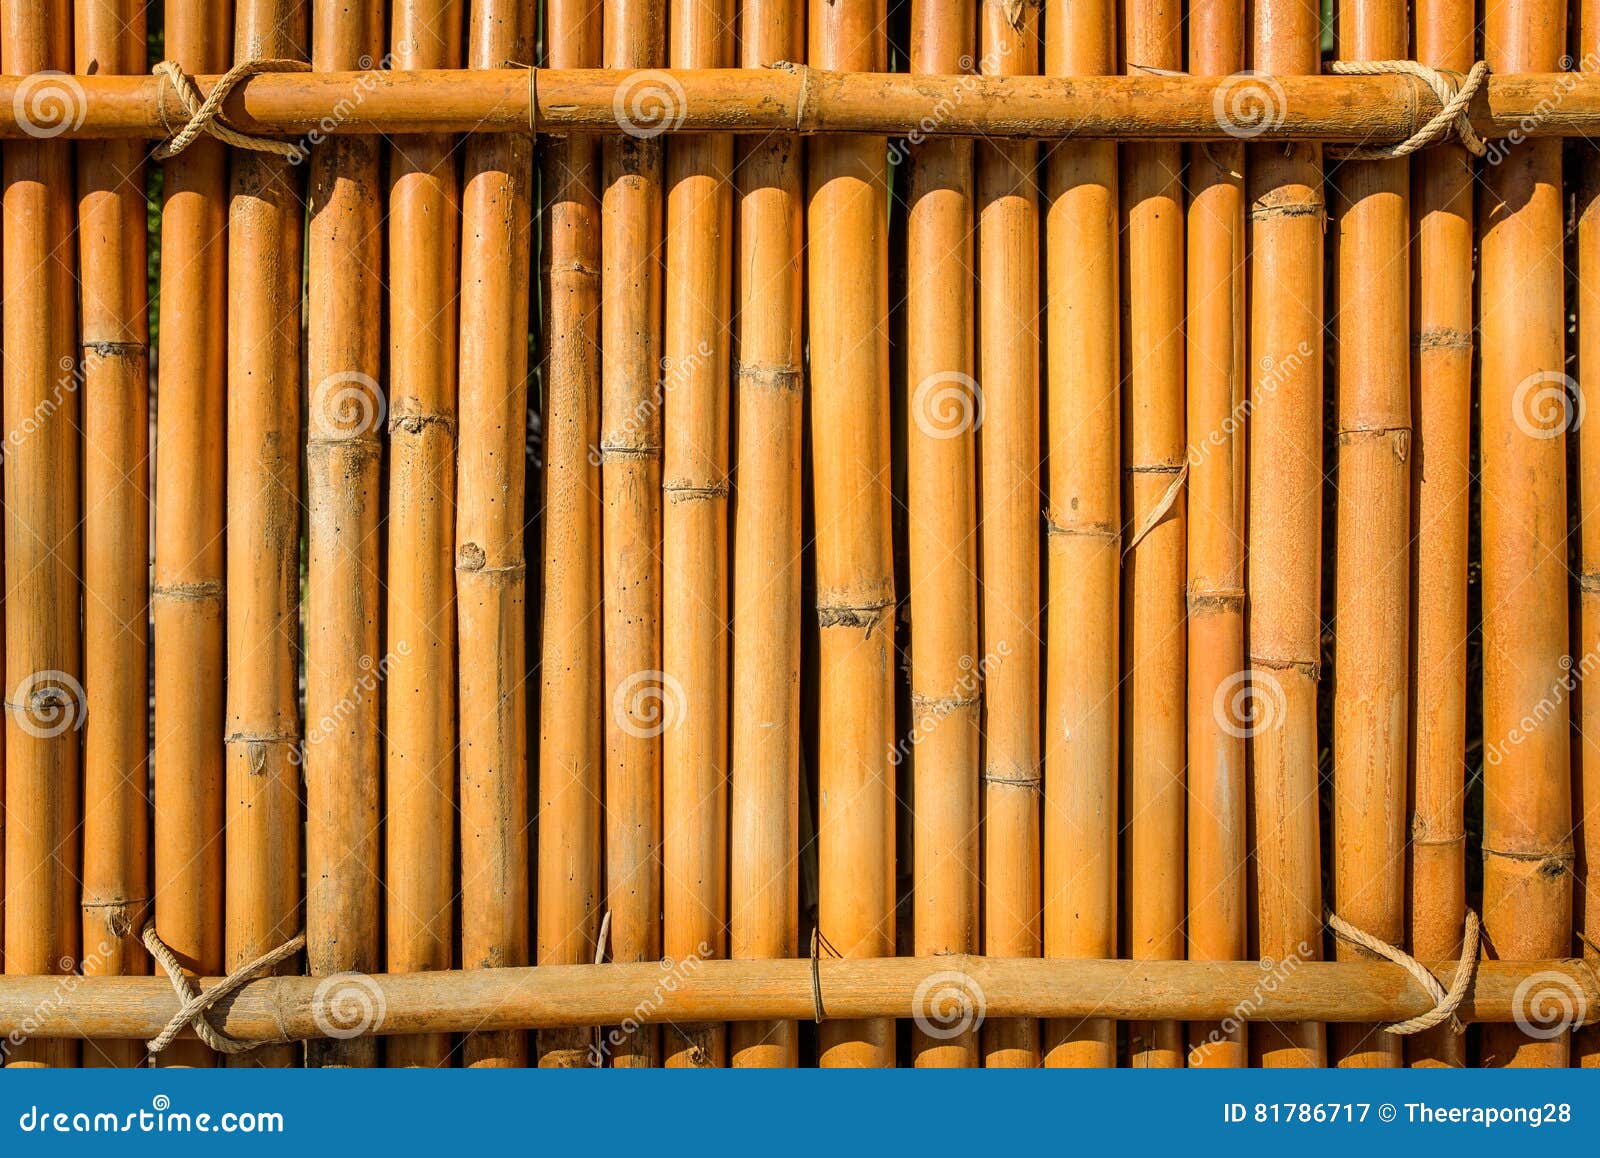 Bamboo Fence Background Texture with Rope Tide at Head Stock Image - Image  of bottom, asia: 81786717